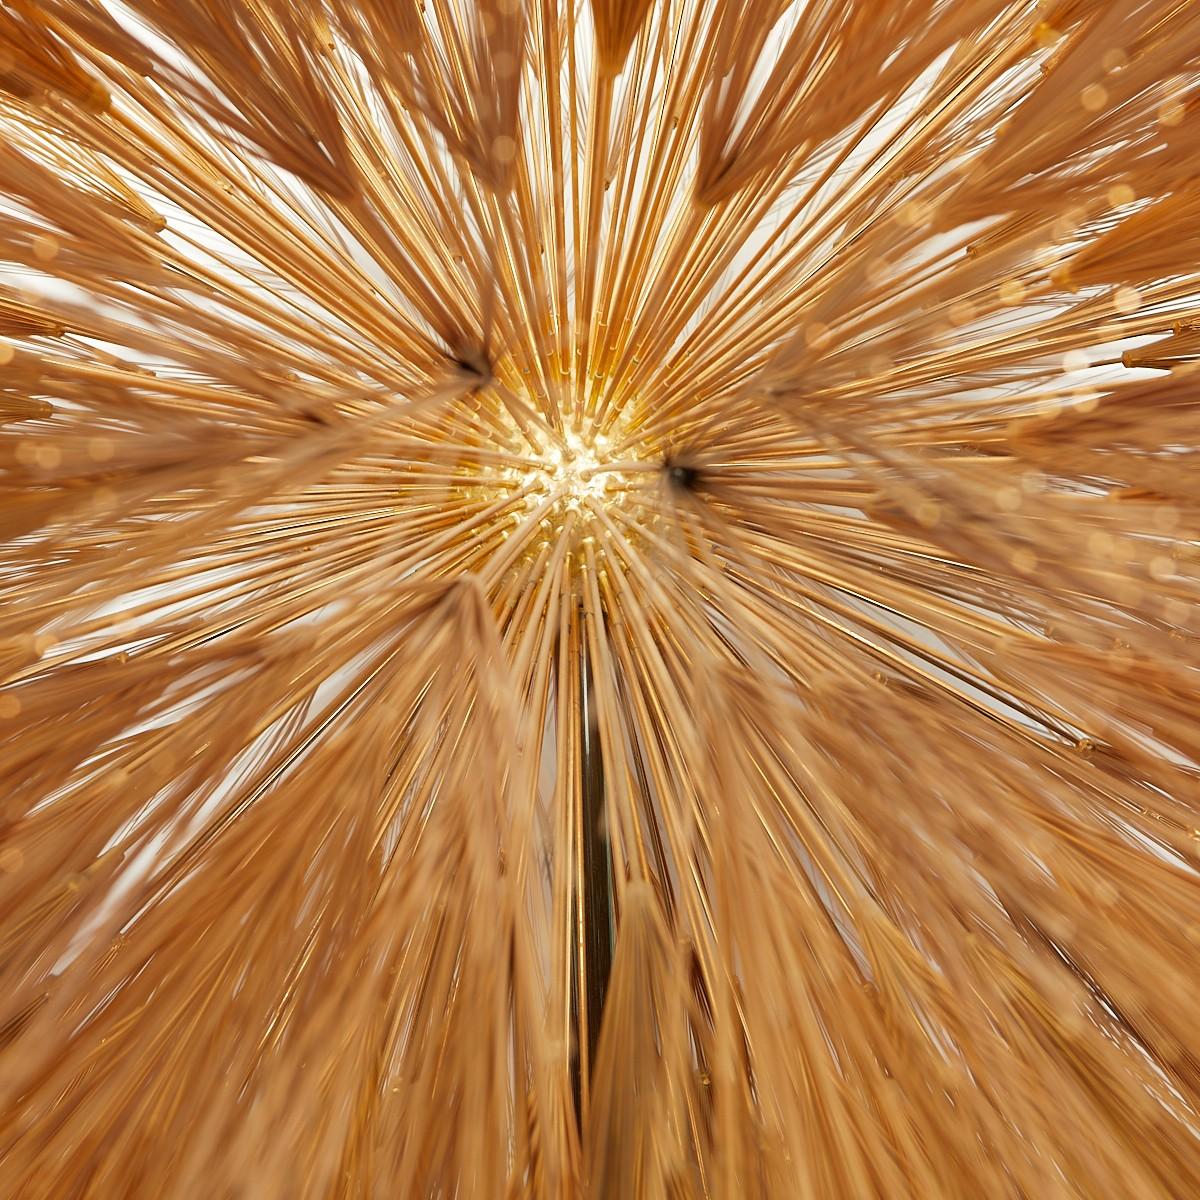 Bertoia's Dandelion form is widely regarded to be the apex of his career. An overwhelming physical presence is balanced by its truly delicate nature. A gilt bronze central sphere is the basis of the form, created by successive application of